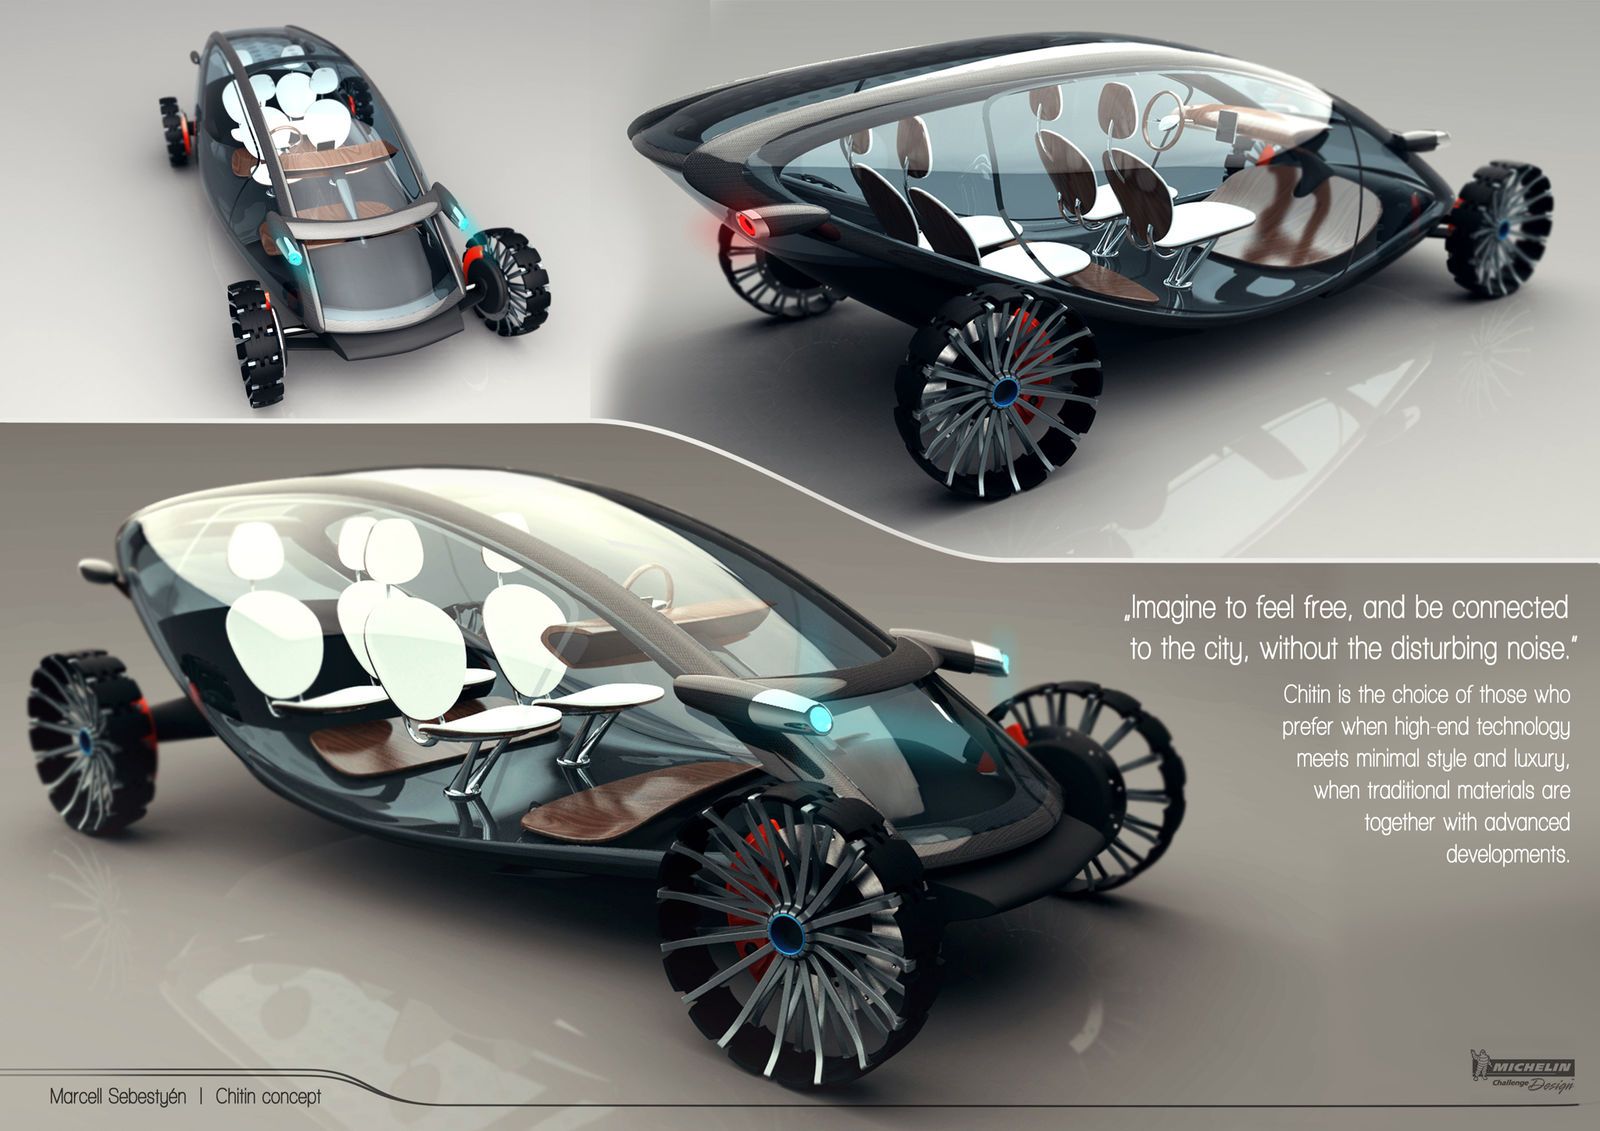 Amazing futuristic car designs from racing cars to rescue vehicles image 22